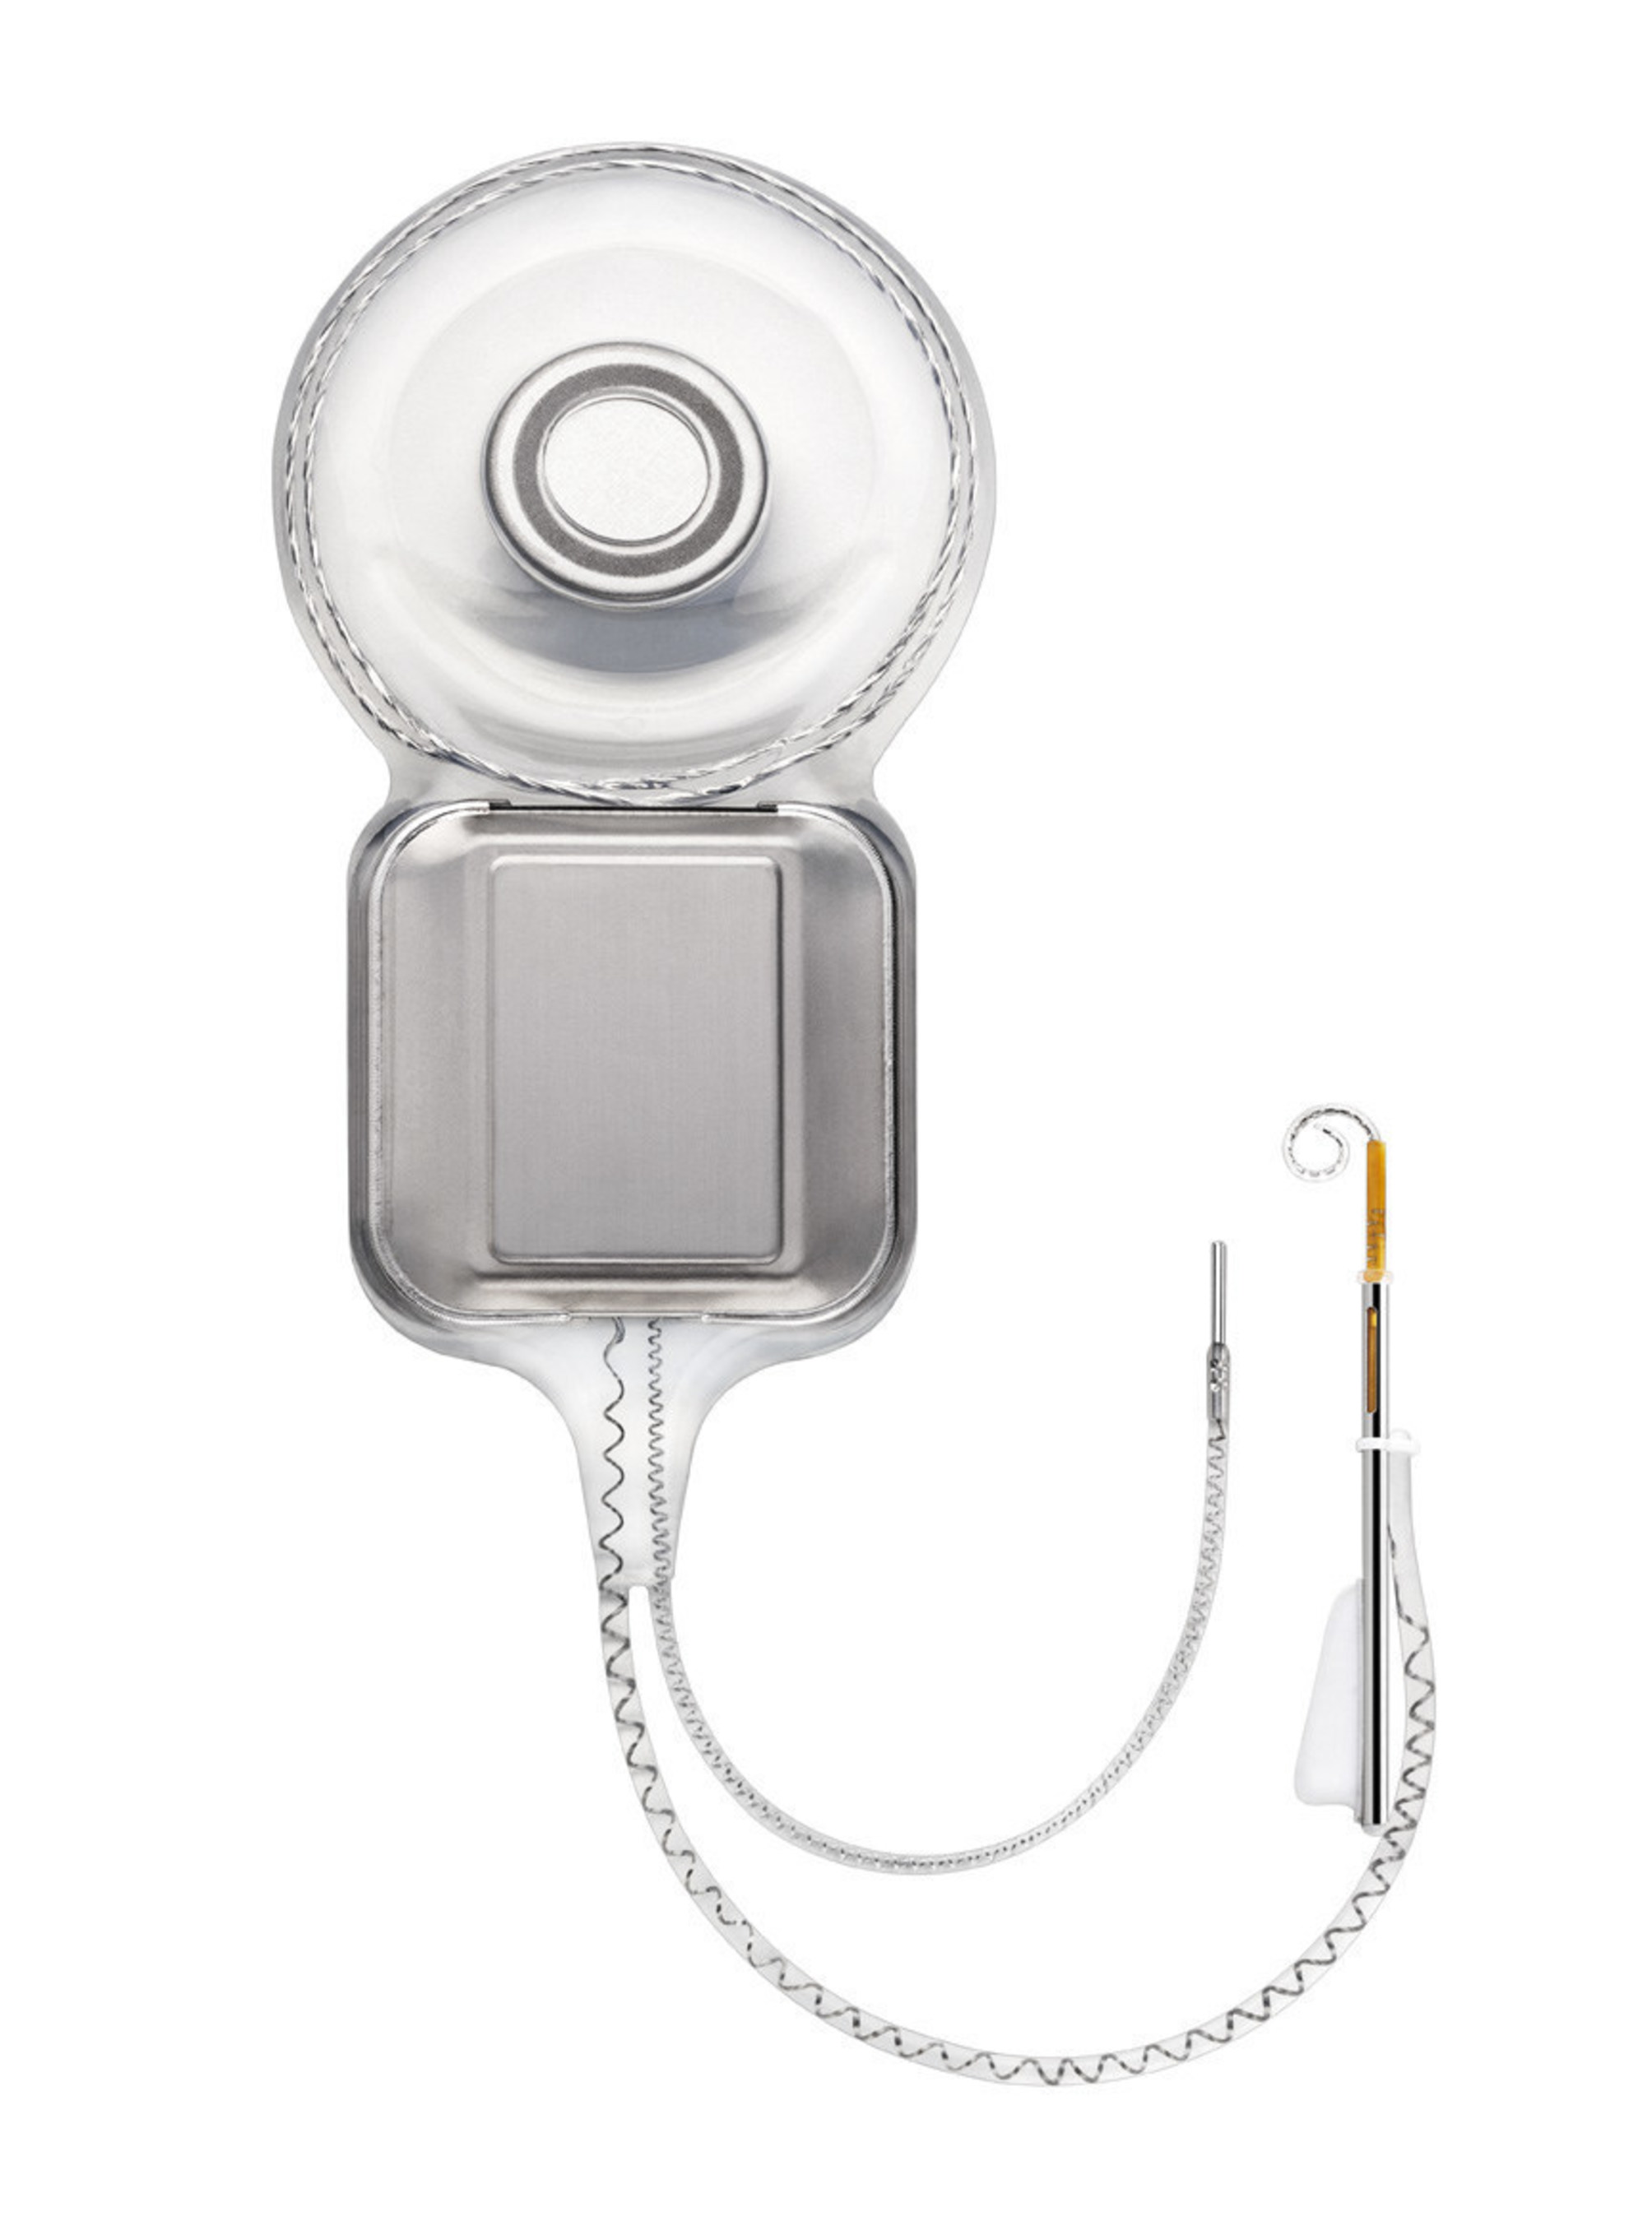 The new Cochlear(TM) Nucleus(R) Profile Implant with Slim Modiolar Electrode (CI532) is designed to preserve hearing structures, boost hearing performance and is easy for surgeons to use.